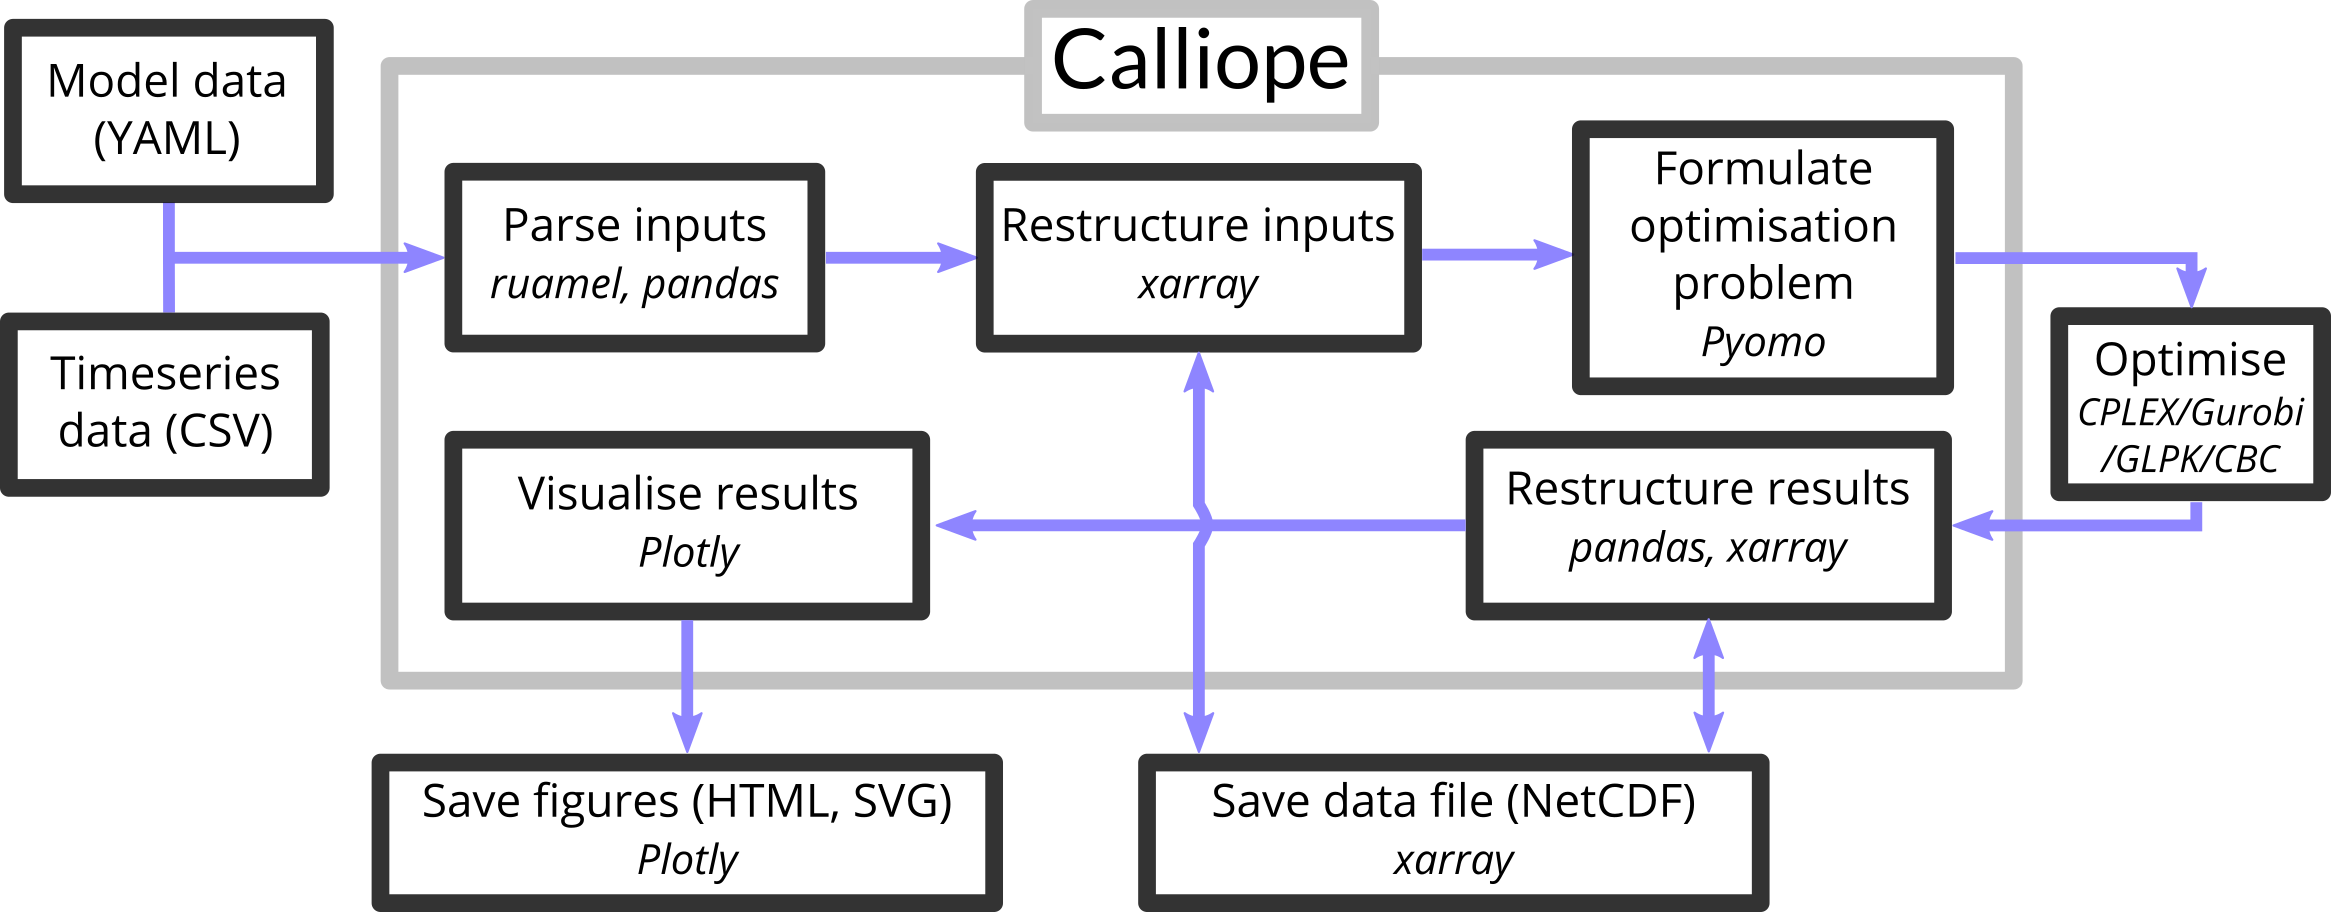 calliope_workflow_overview